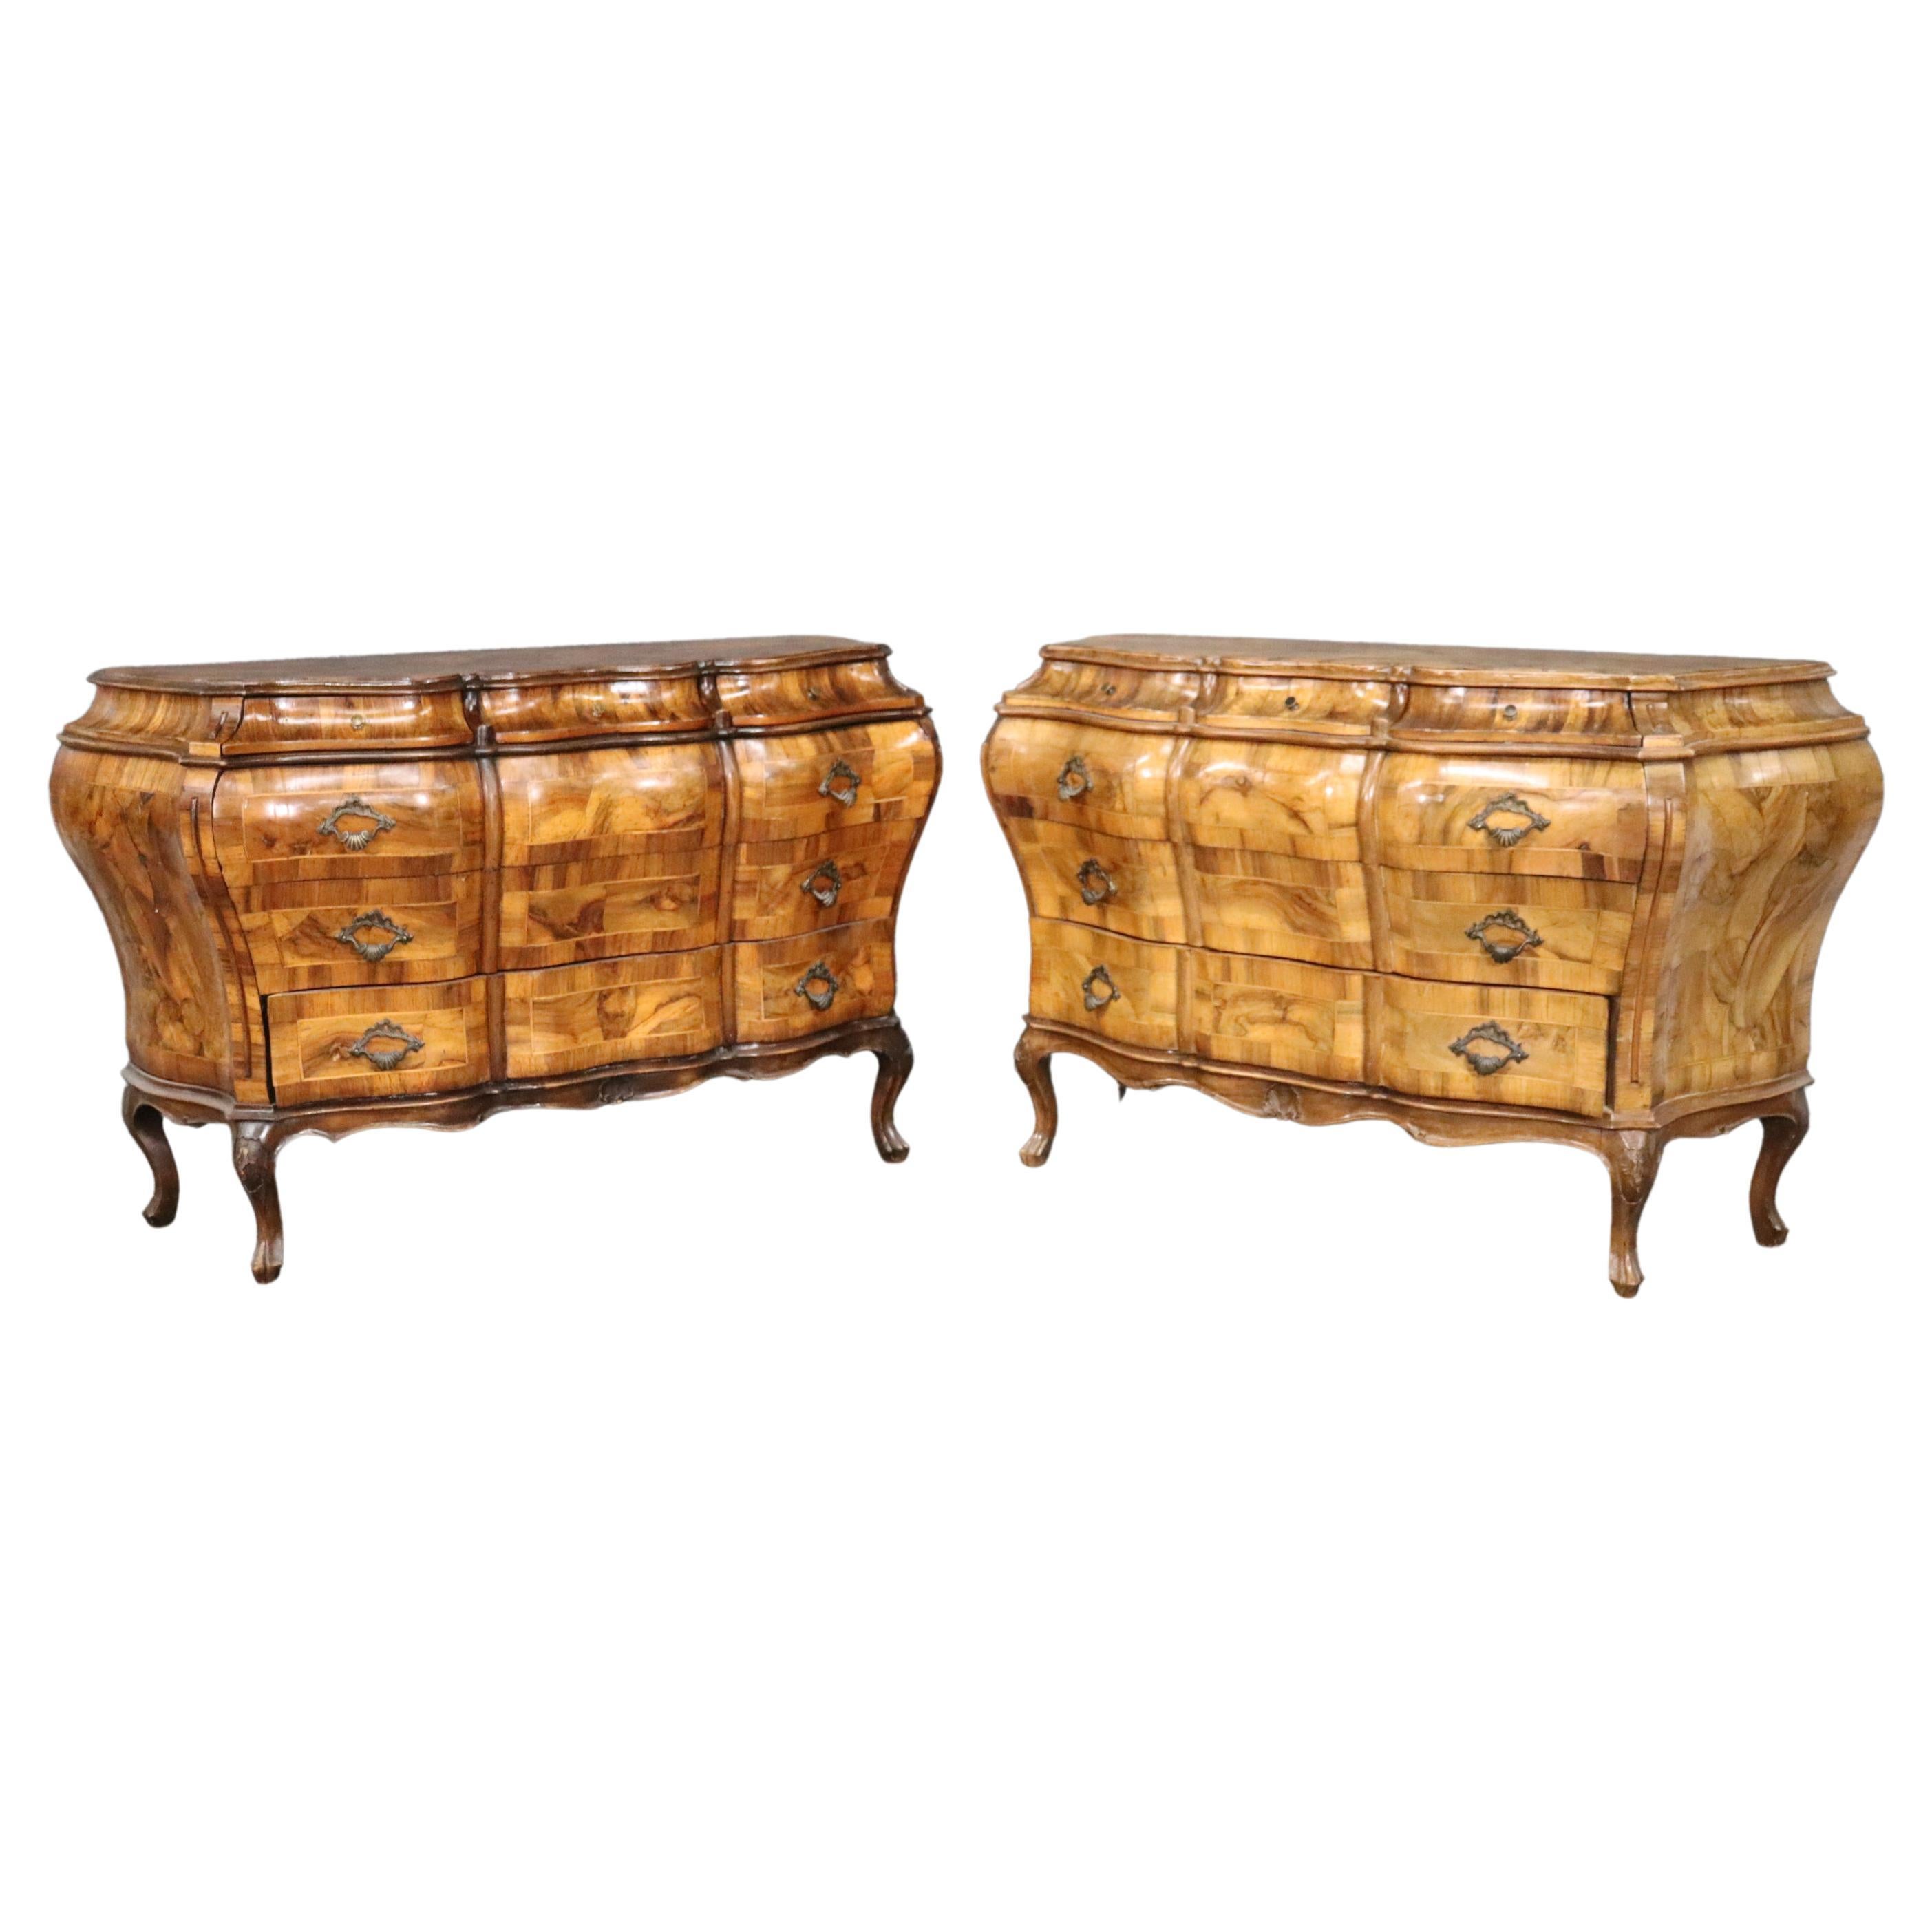 Incredible Pair of Italian Provincial Olivewood Rococo Bombe Commodes